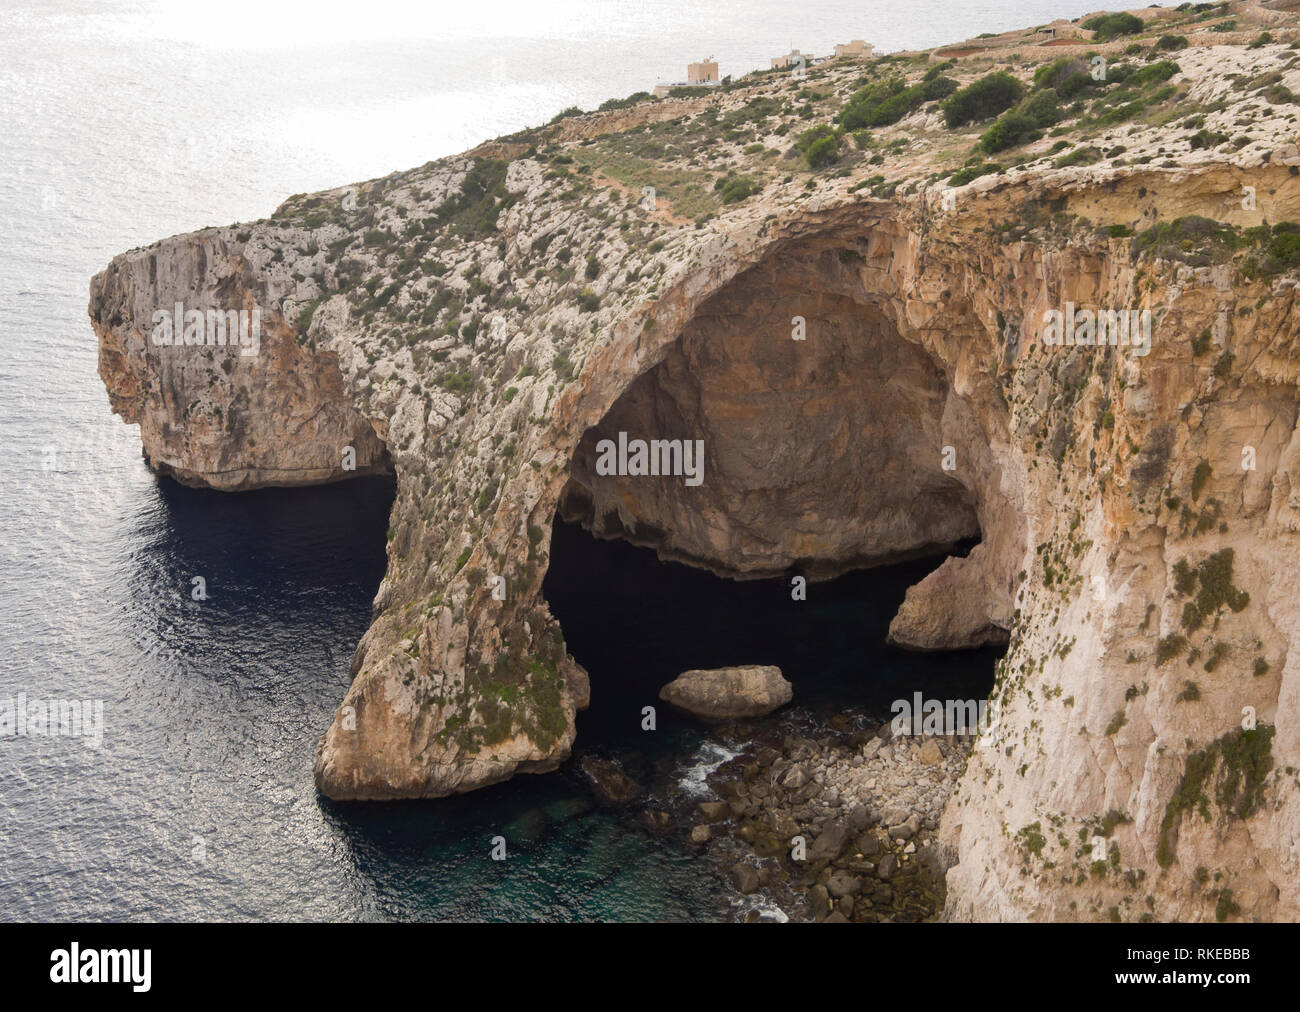 The rugged coastline of Malta, here seen from the Blue grotto Viewpoint Stock Photo